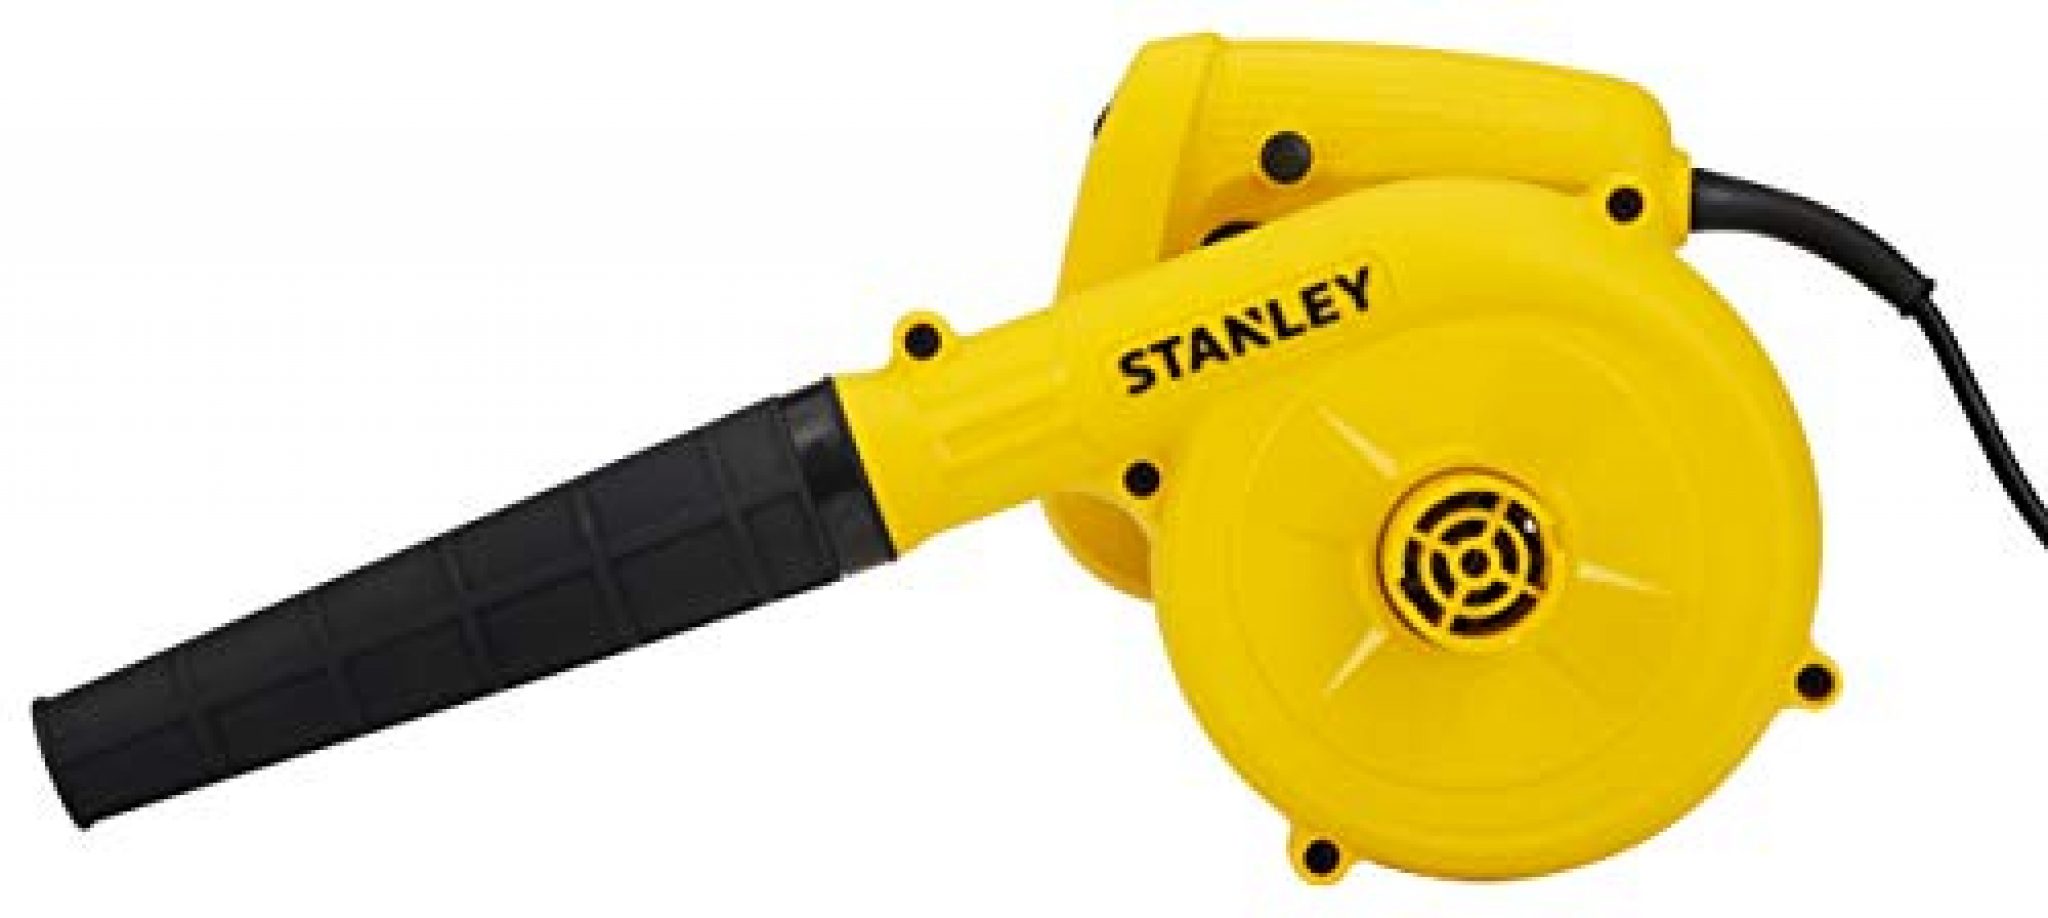 STANLEY STPT600 600W Variable Speed Blower (Yellow and Black) | Offer ...